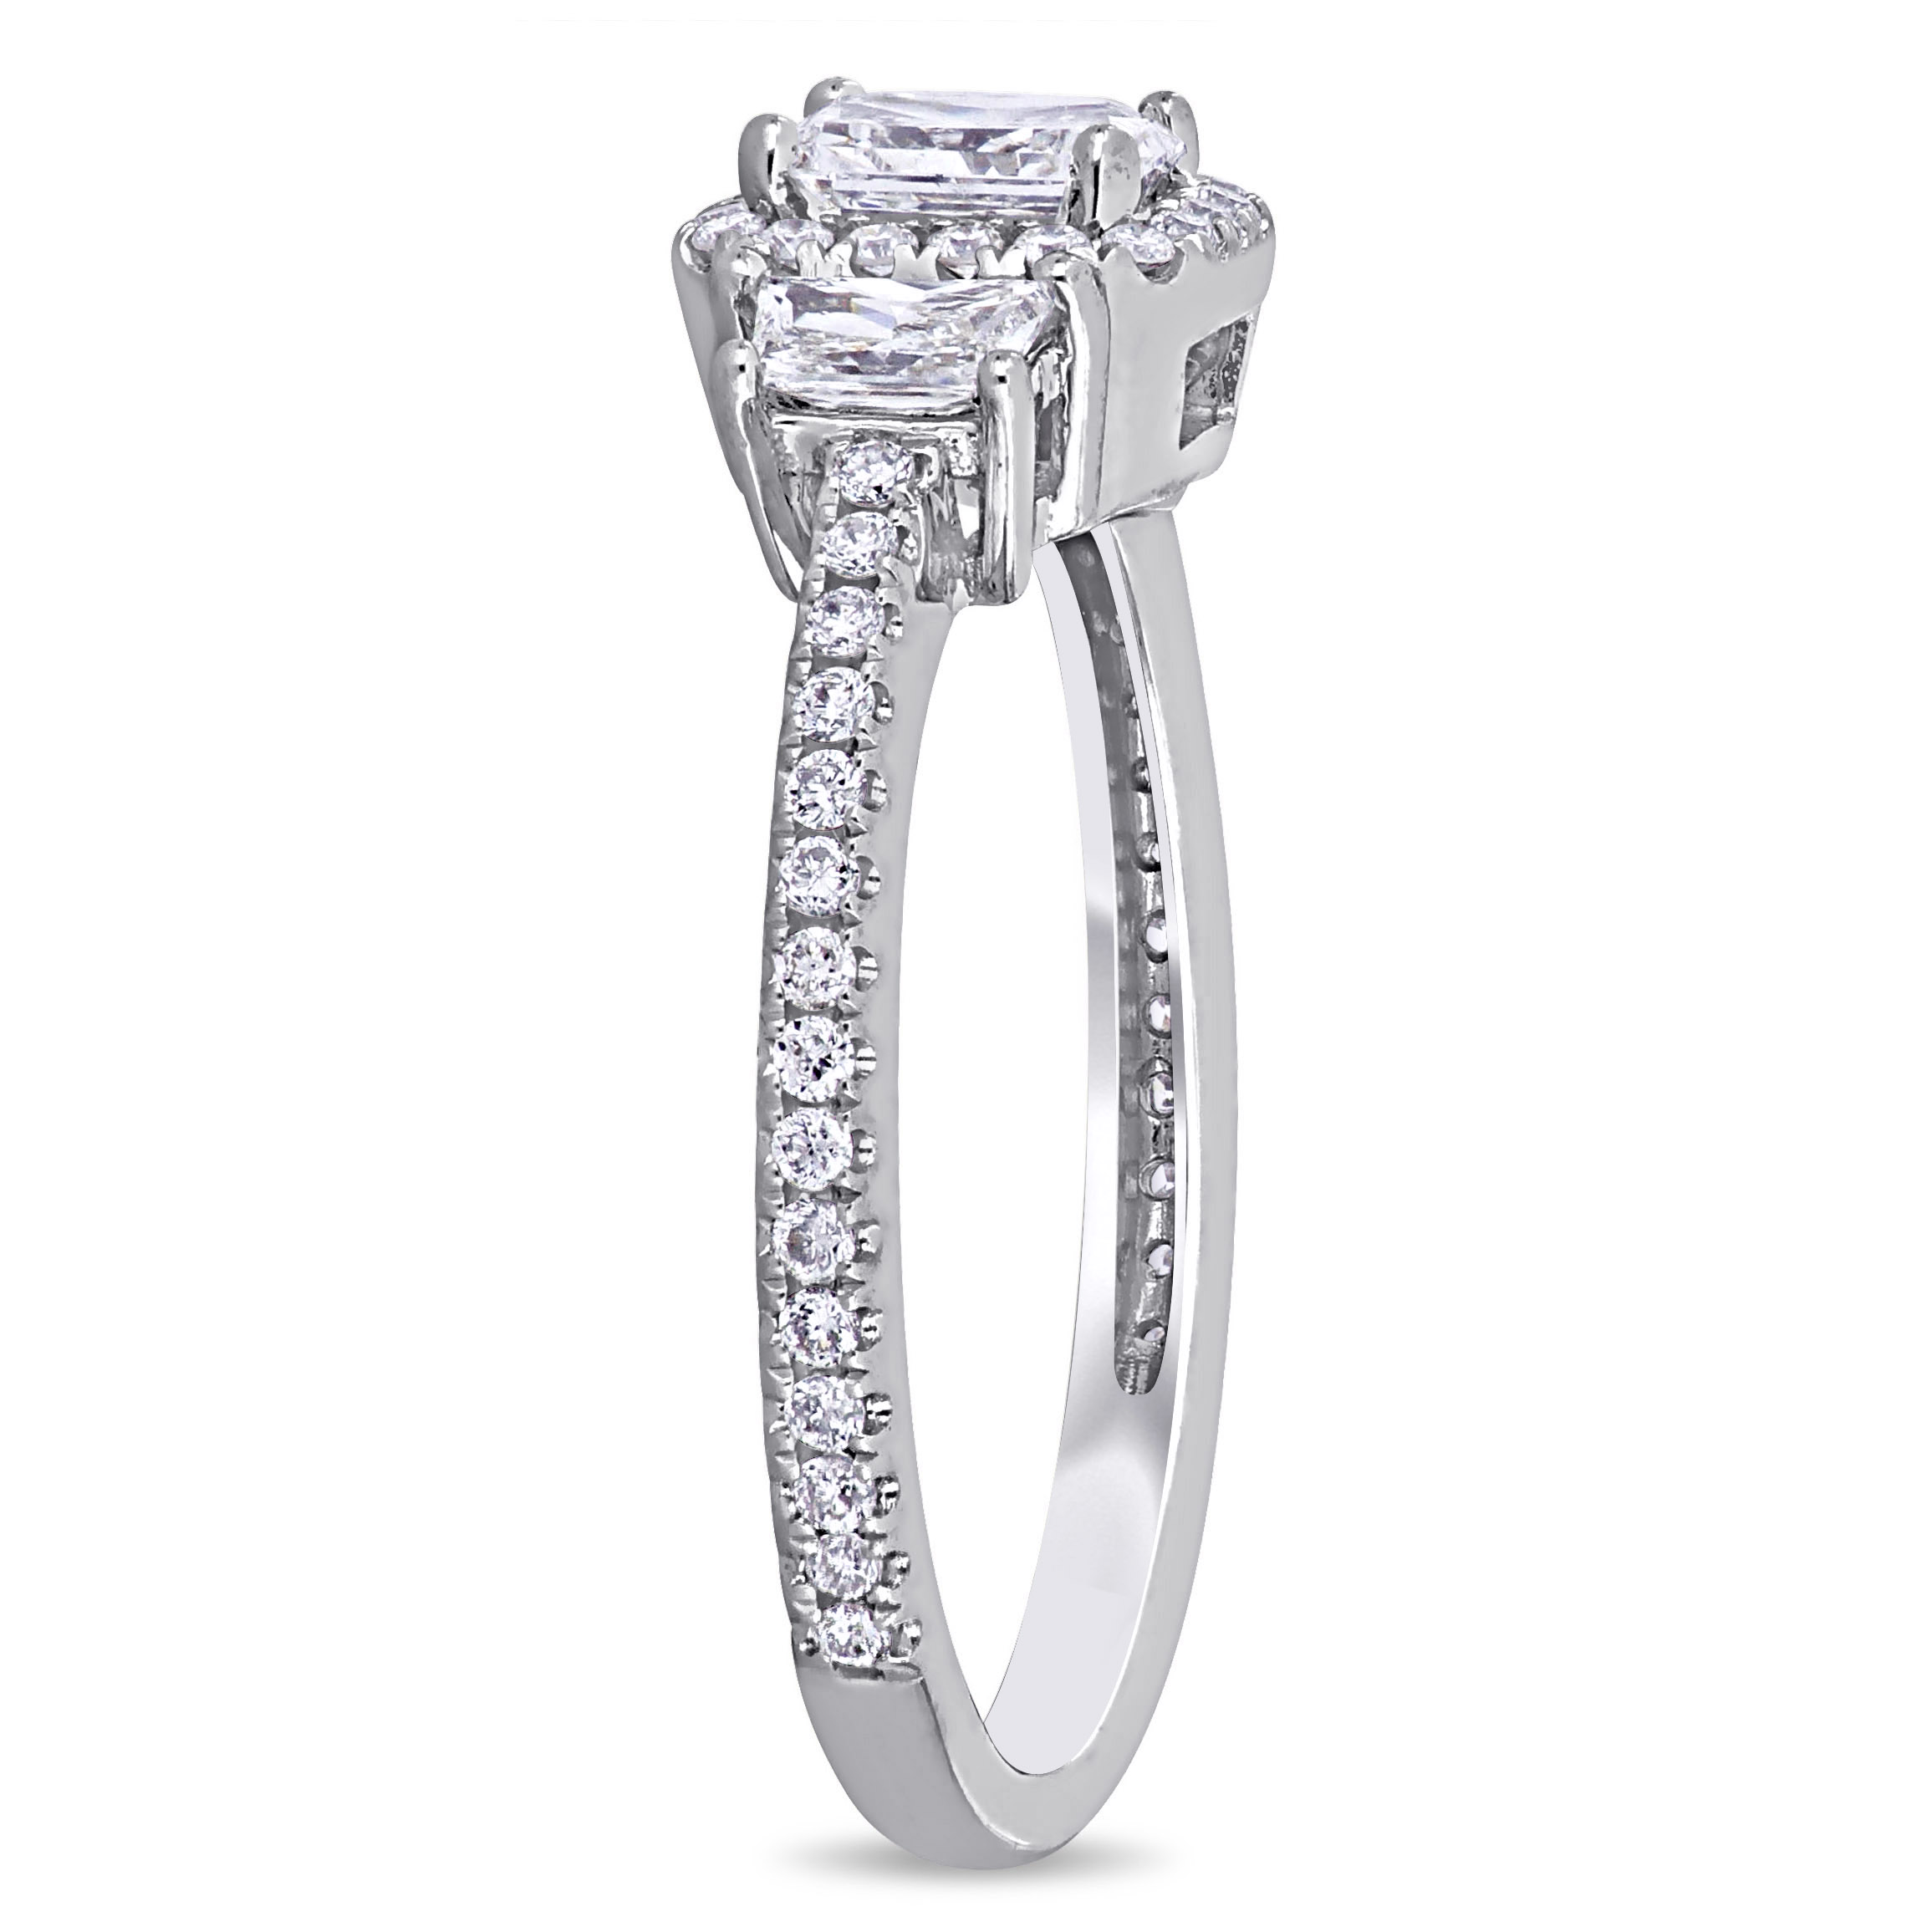 1 CT TW Radiant and Trapezoid-Cut Diamond 3-Stone Halo Engagement Ring in 14k White Gold